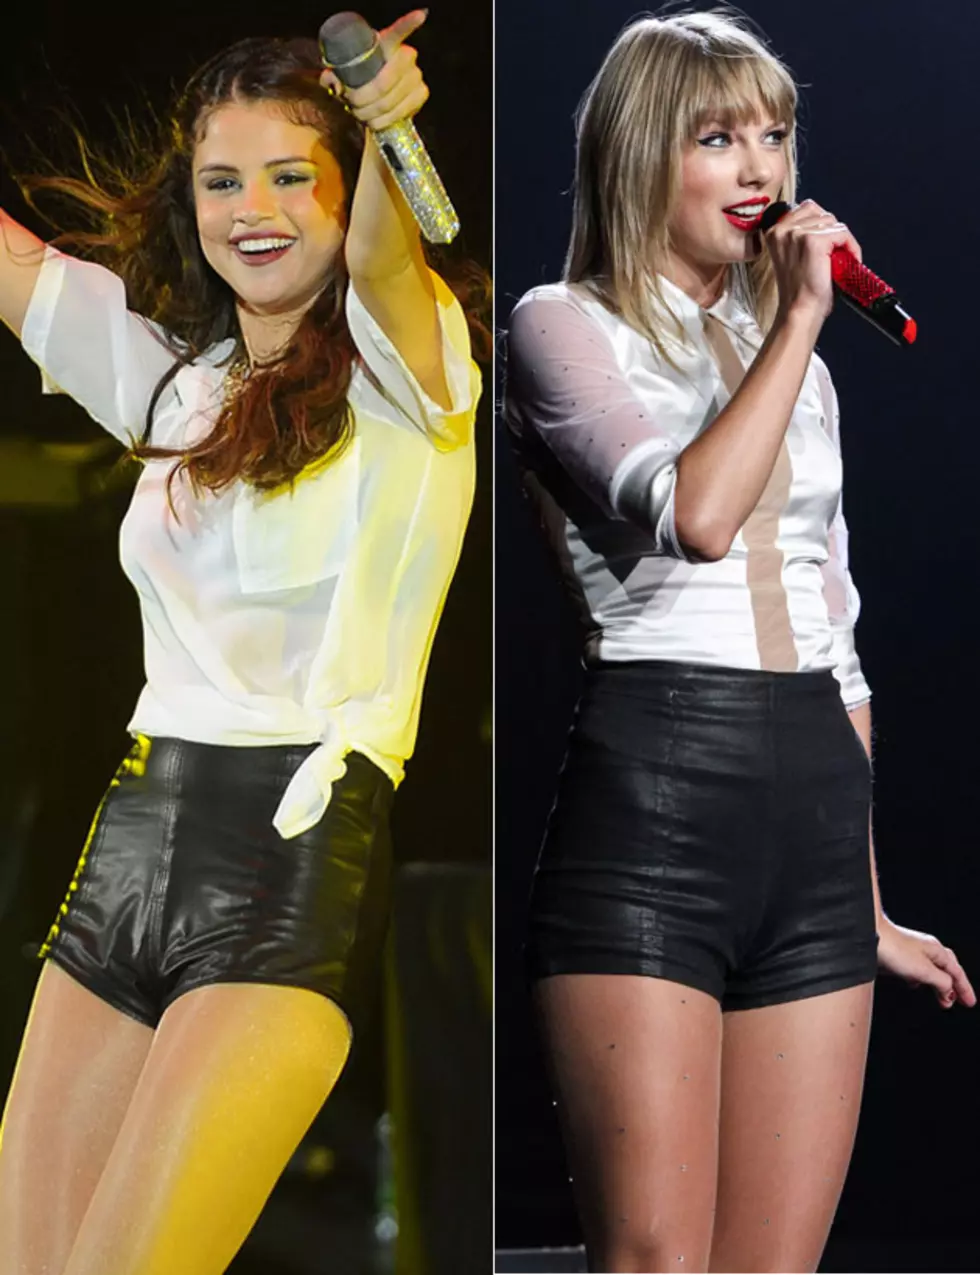 Selena Gomez vs. Taylor Swift: Who Looks Better in Leather Shorts? &#8211; Readers Poll